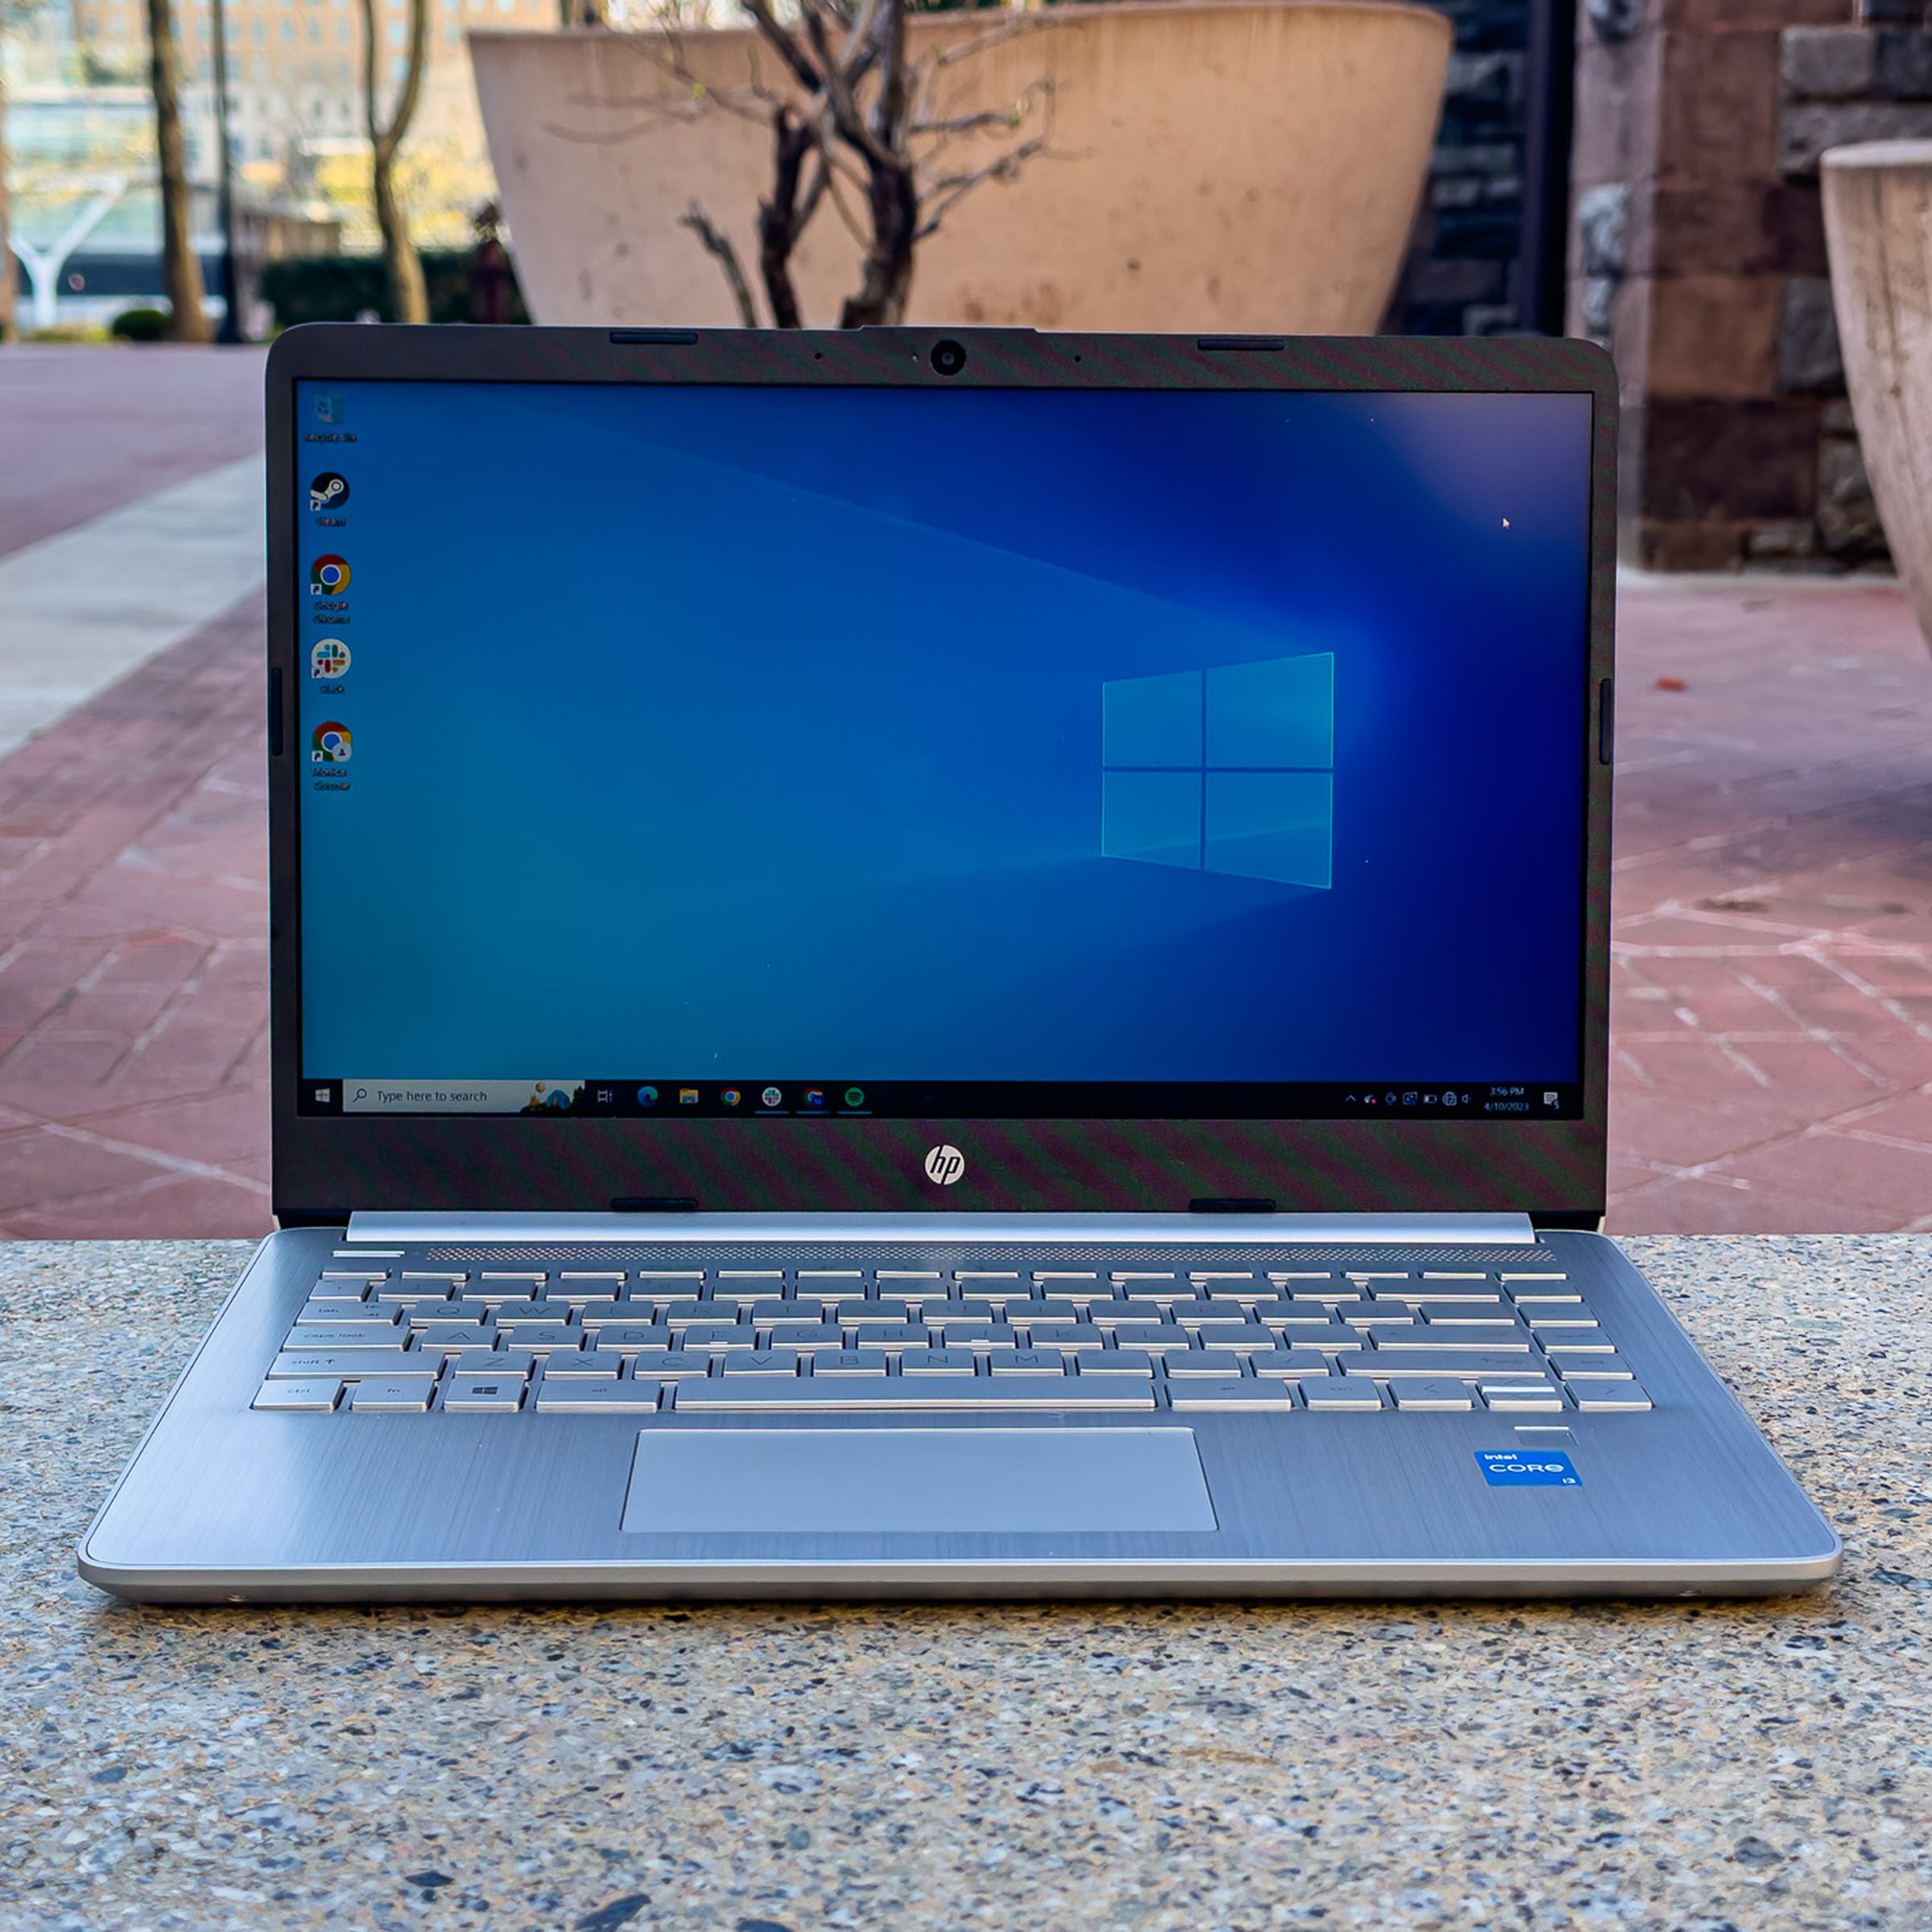 The HP 14 open in an outdoor setting displaying the Windows default desktop background.